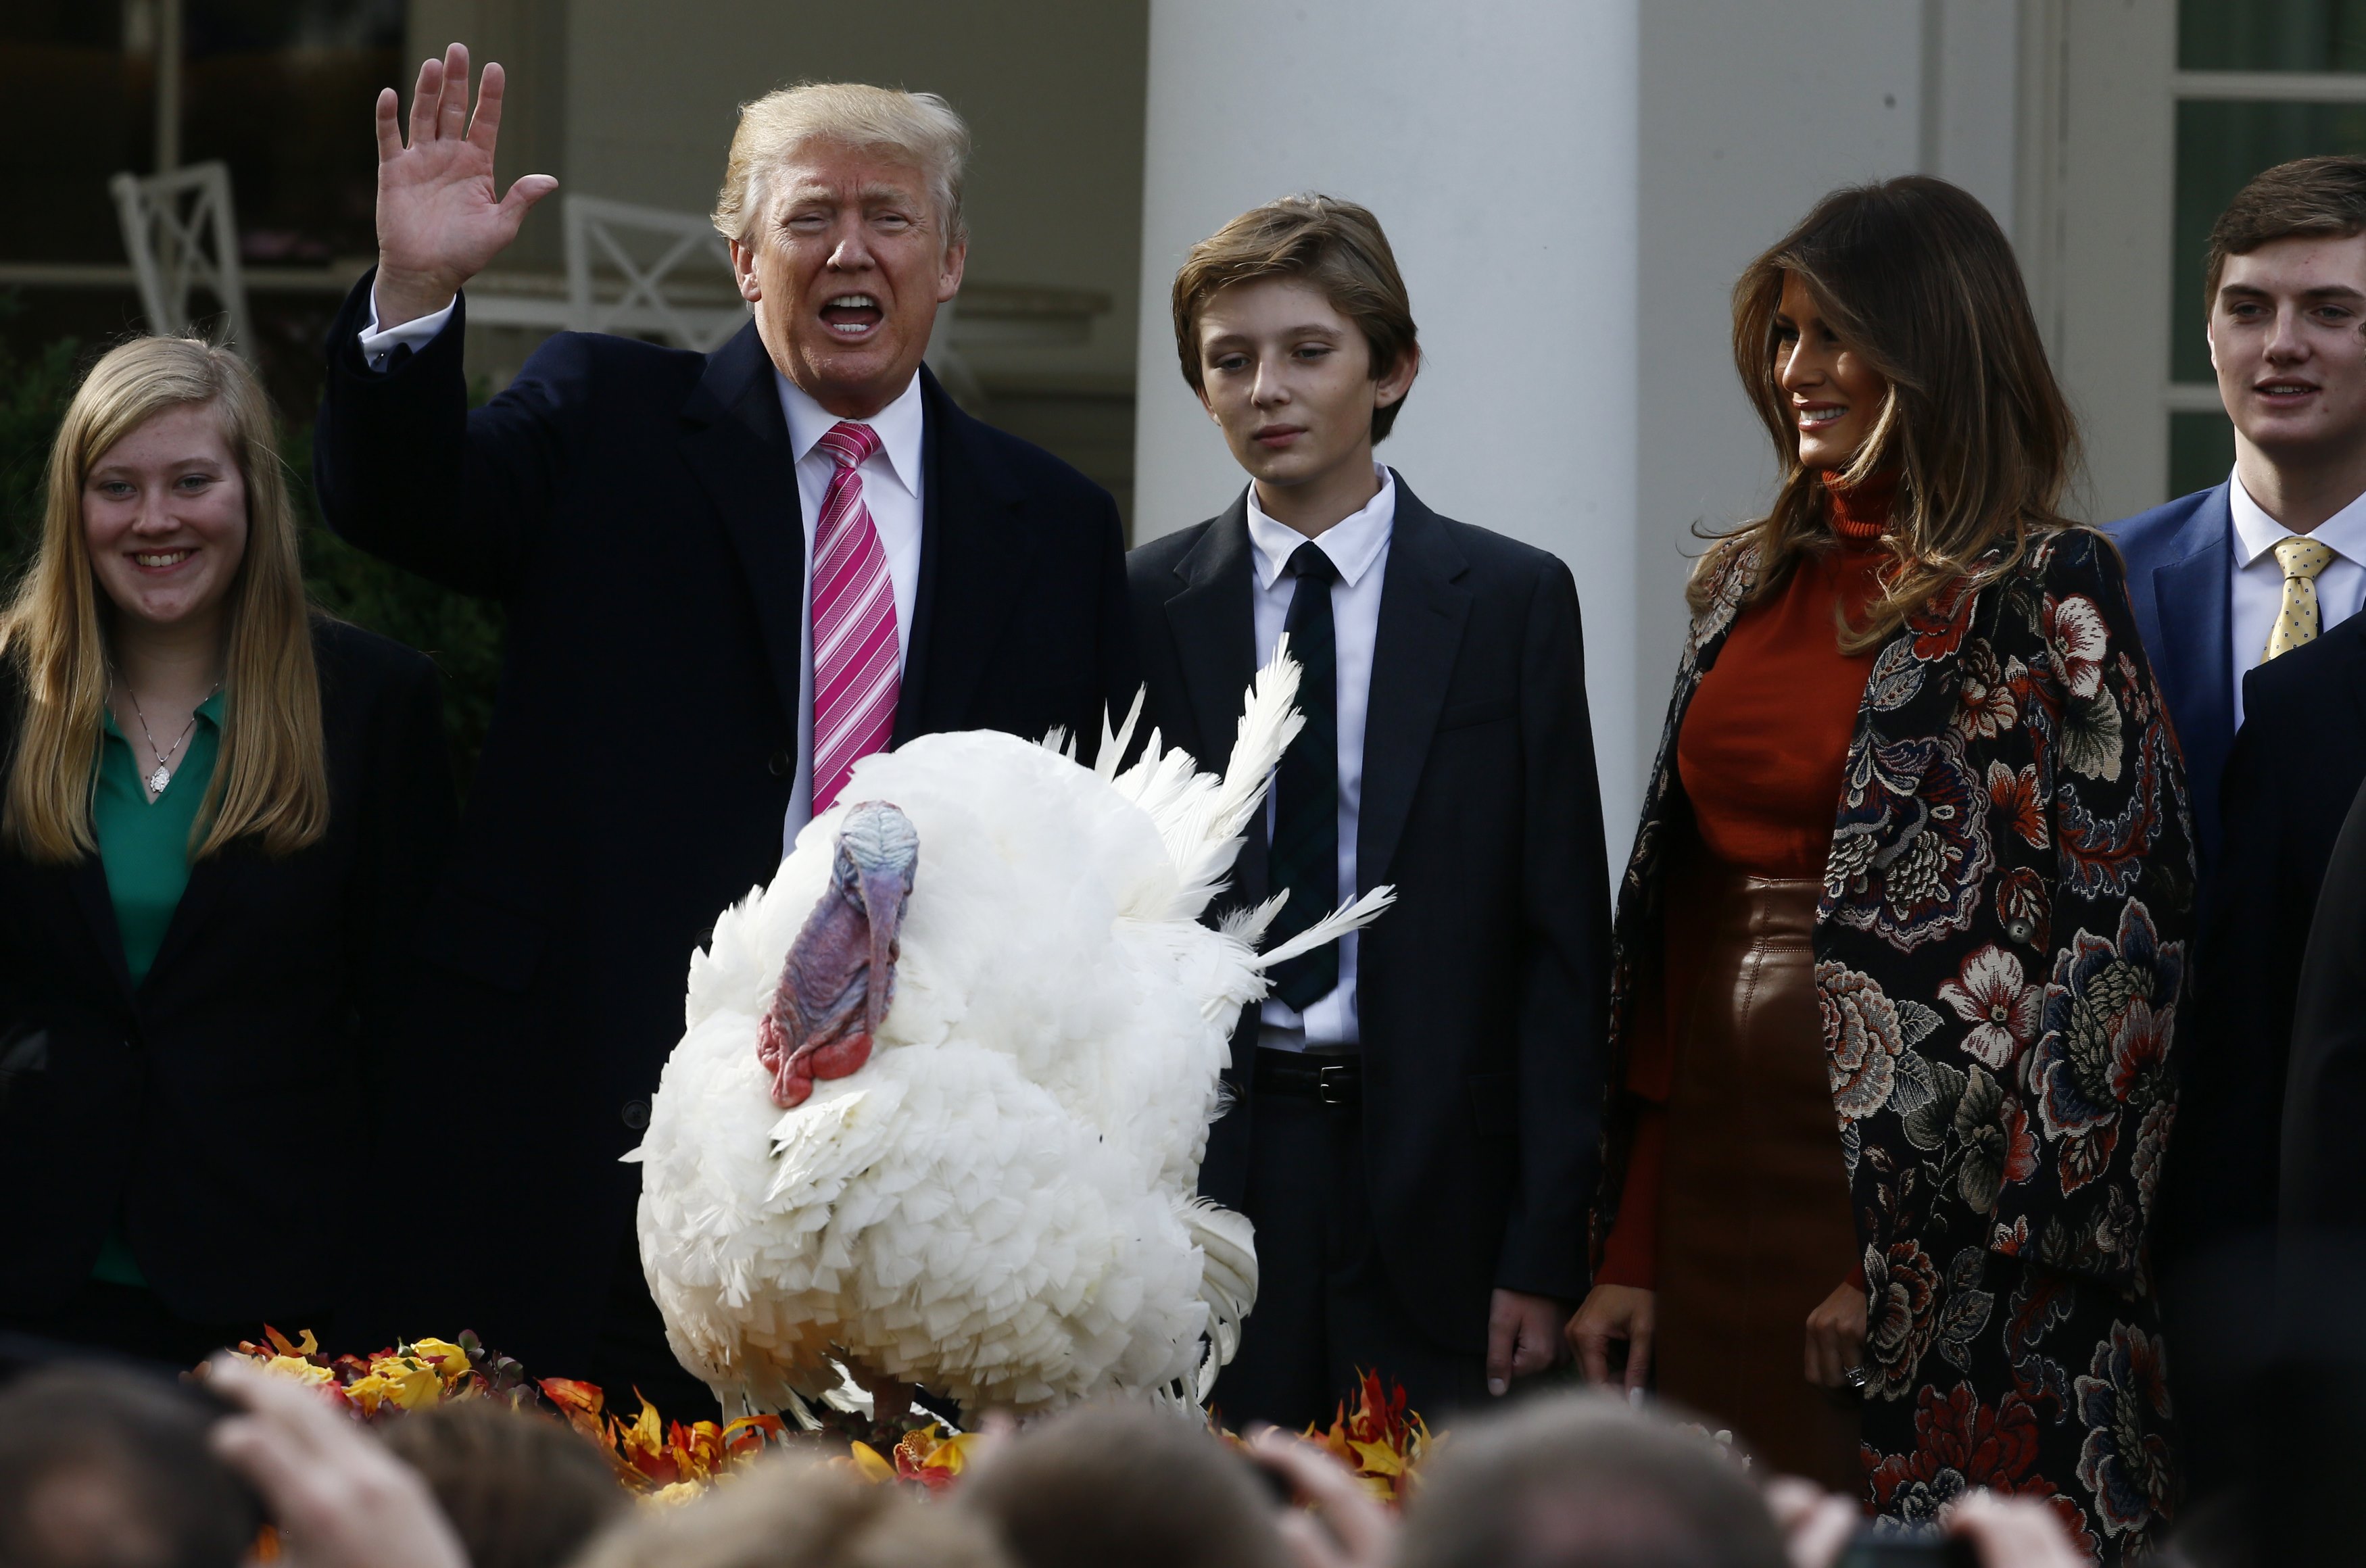 U.S. President Donald Trump participates in the 70th National Thanksgiving turkey pardoning ceremony as son Barron and first lady Melania Trump look on in the Rose Garden of the White House in Washington, U.S., November 21, 2017. REUTERS/Jim Bourg